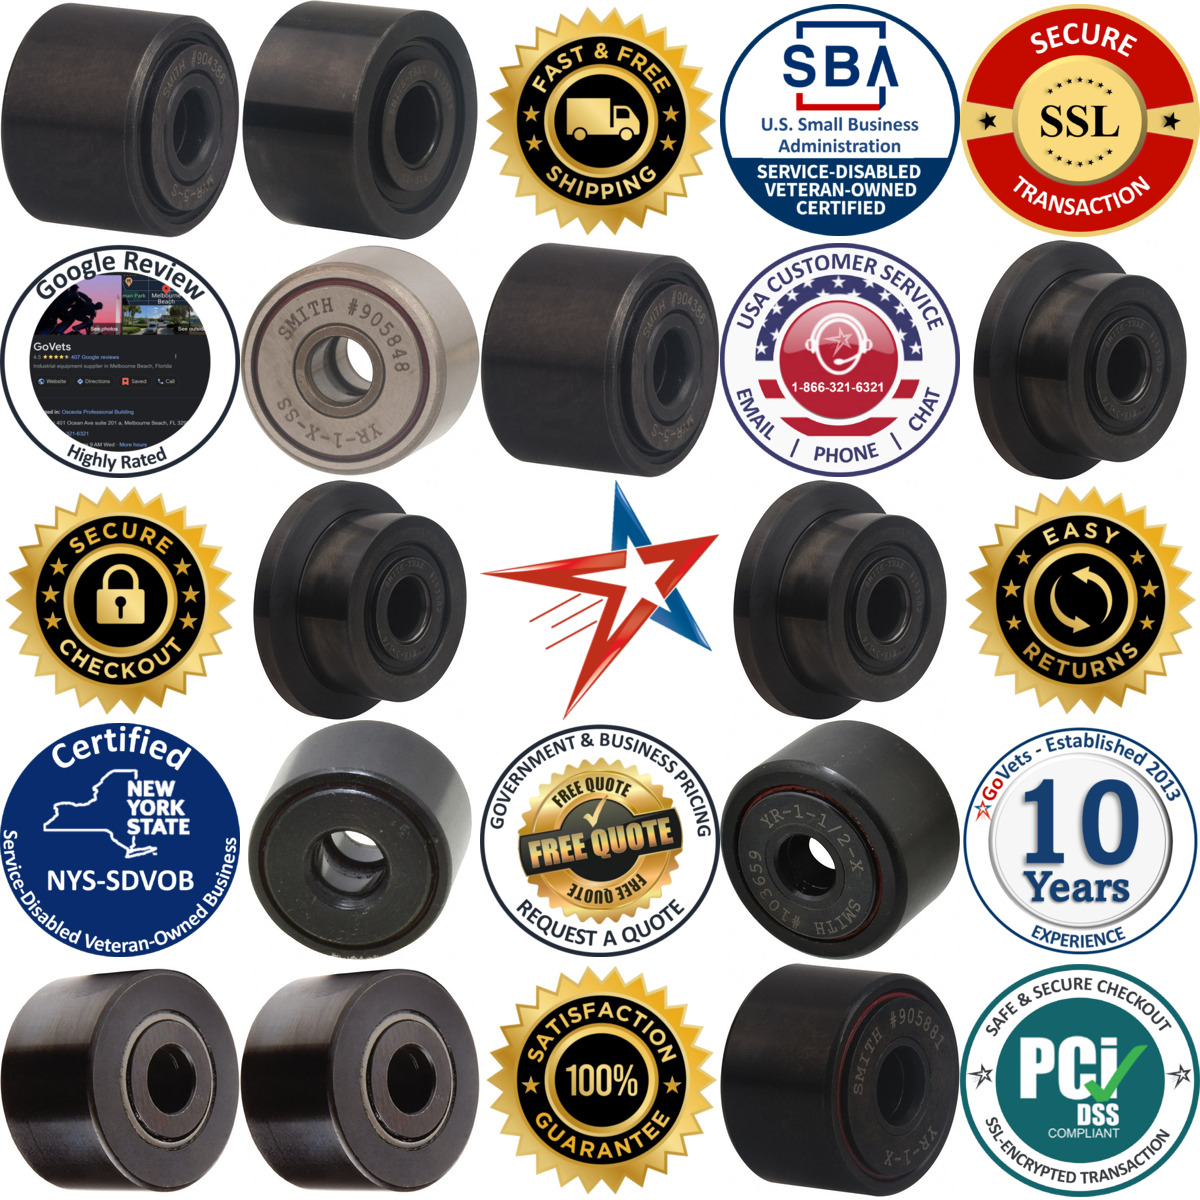 A selection of Accurate Bushing products on GoVets